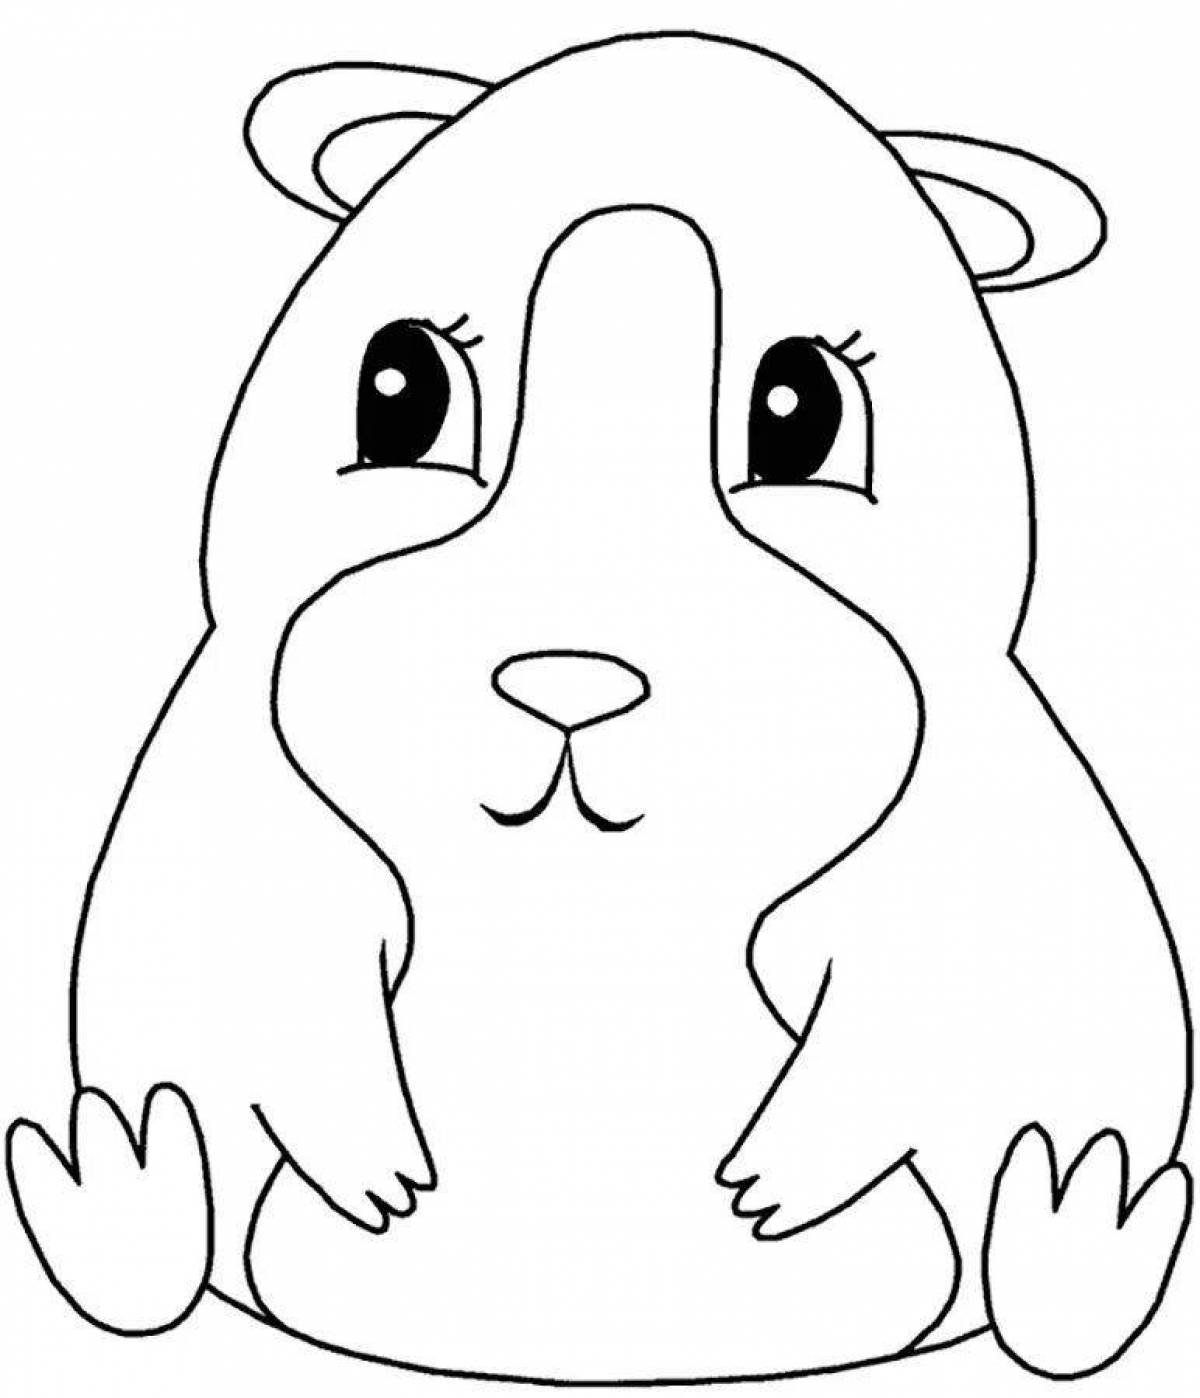 Cute hamster coloring pages for kids